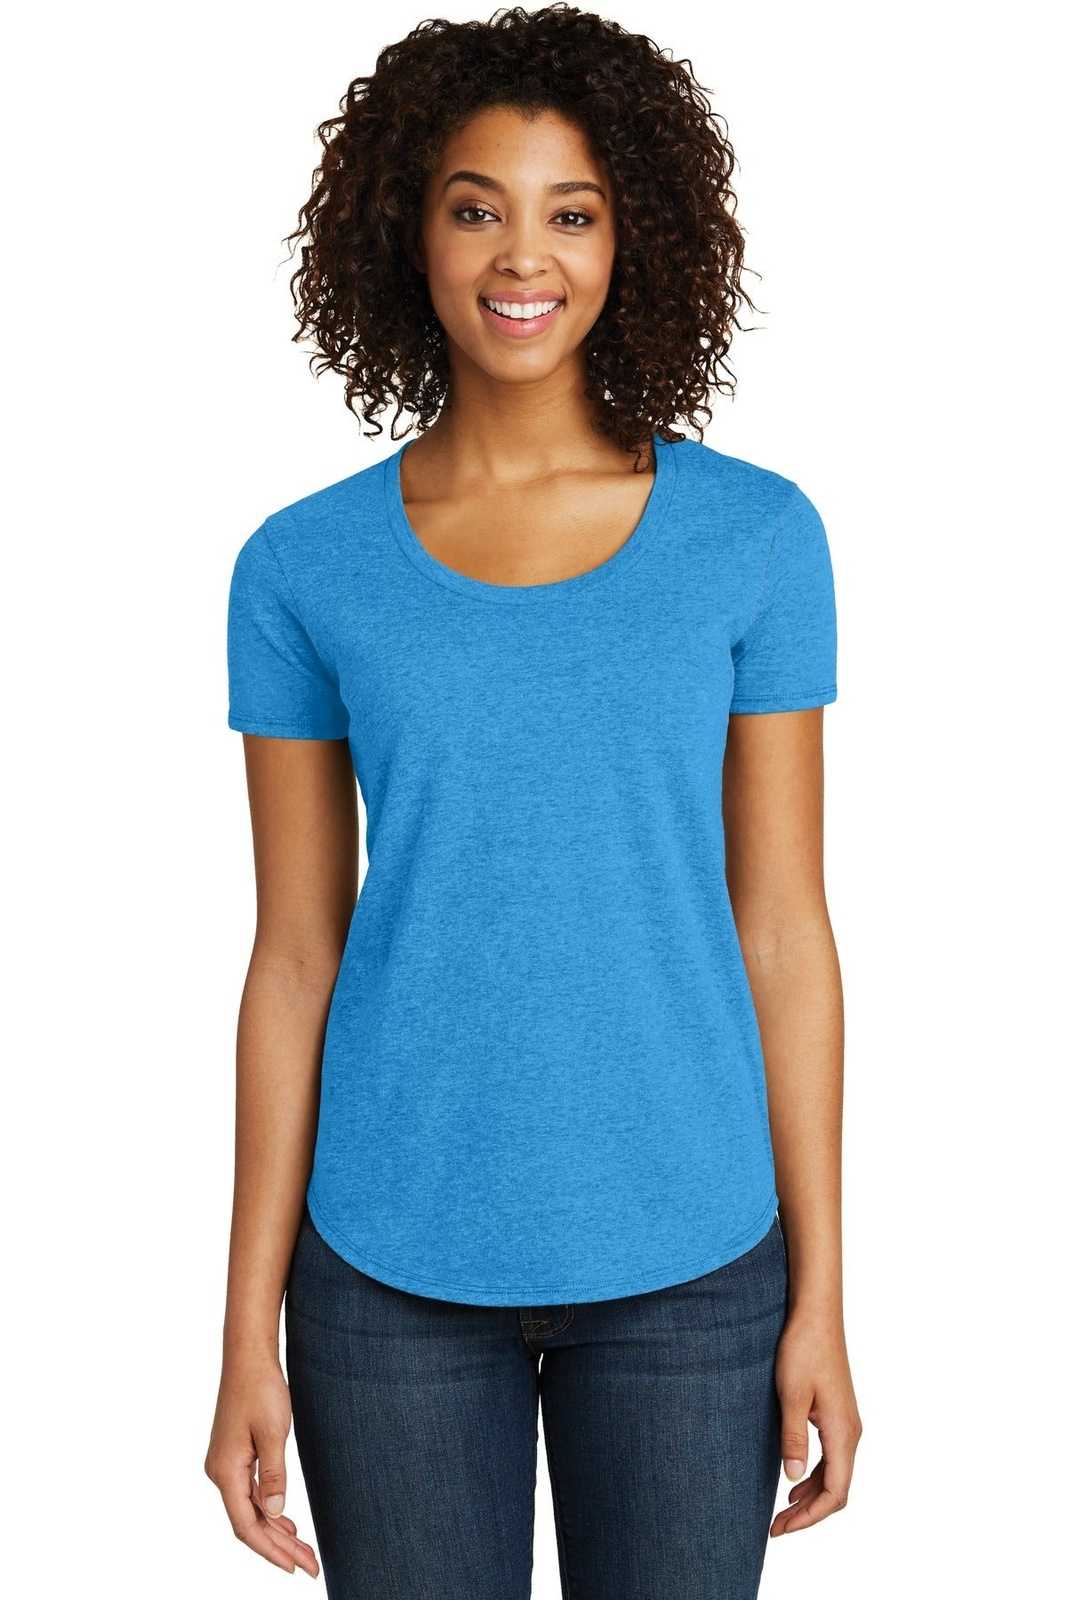 District DT6401 Women's Fitted Very Important Tee Scoop Neck - Heathered Bright Turquoise - HIT a Double - 1